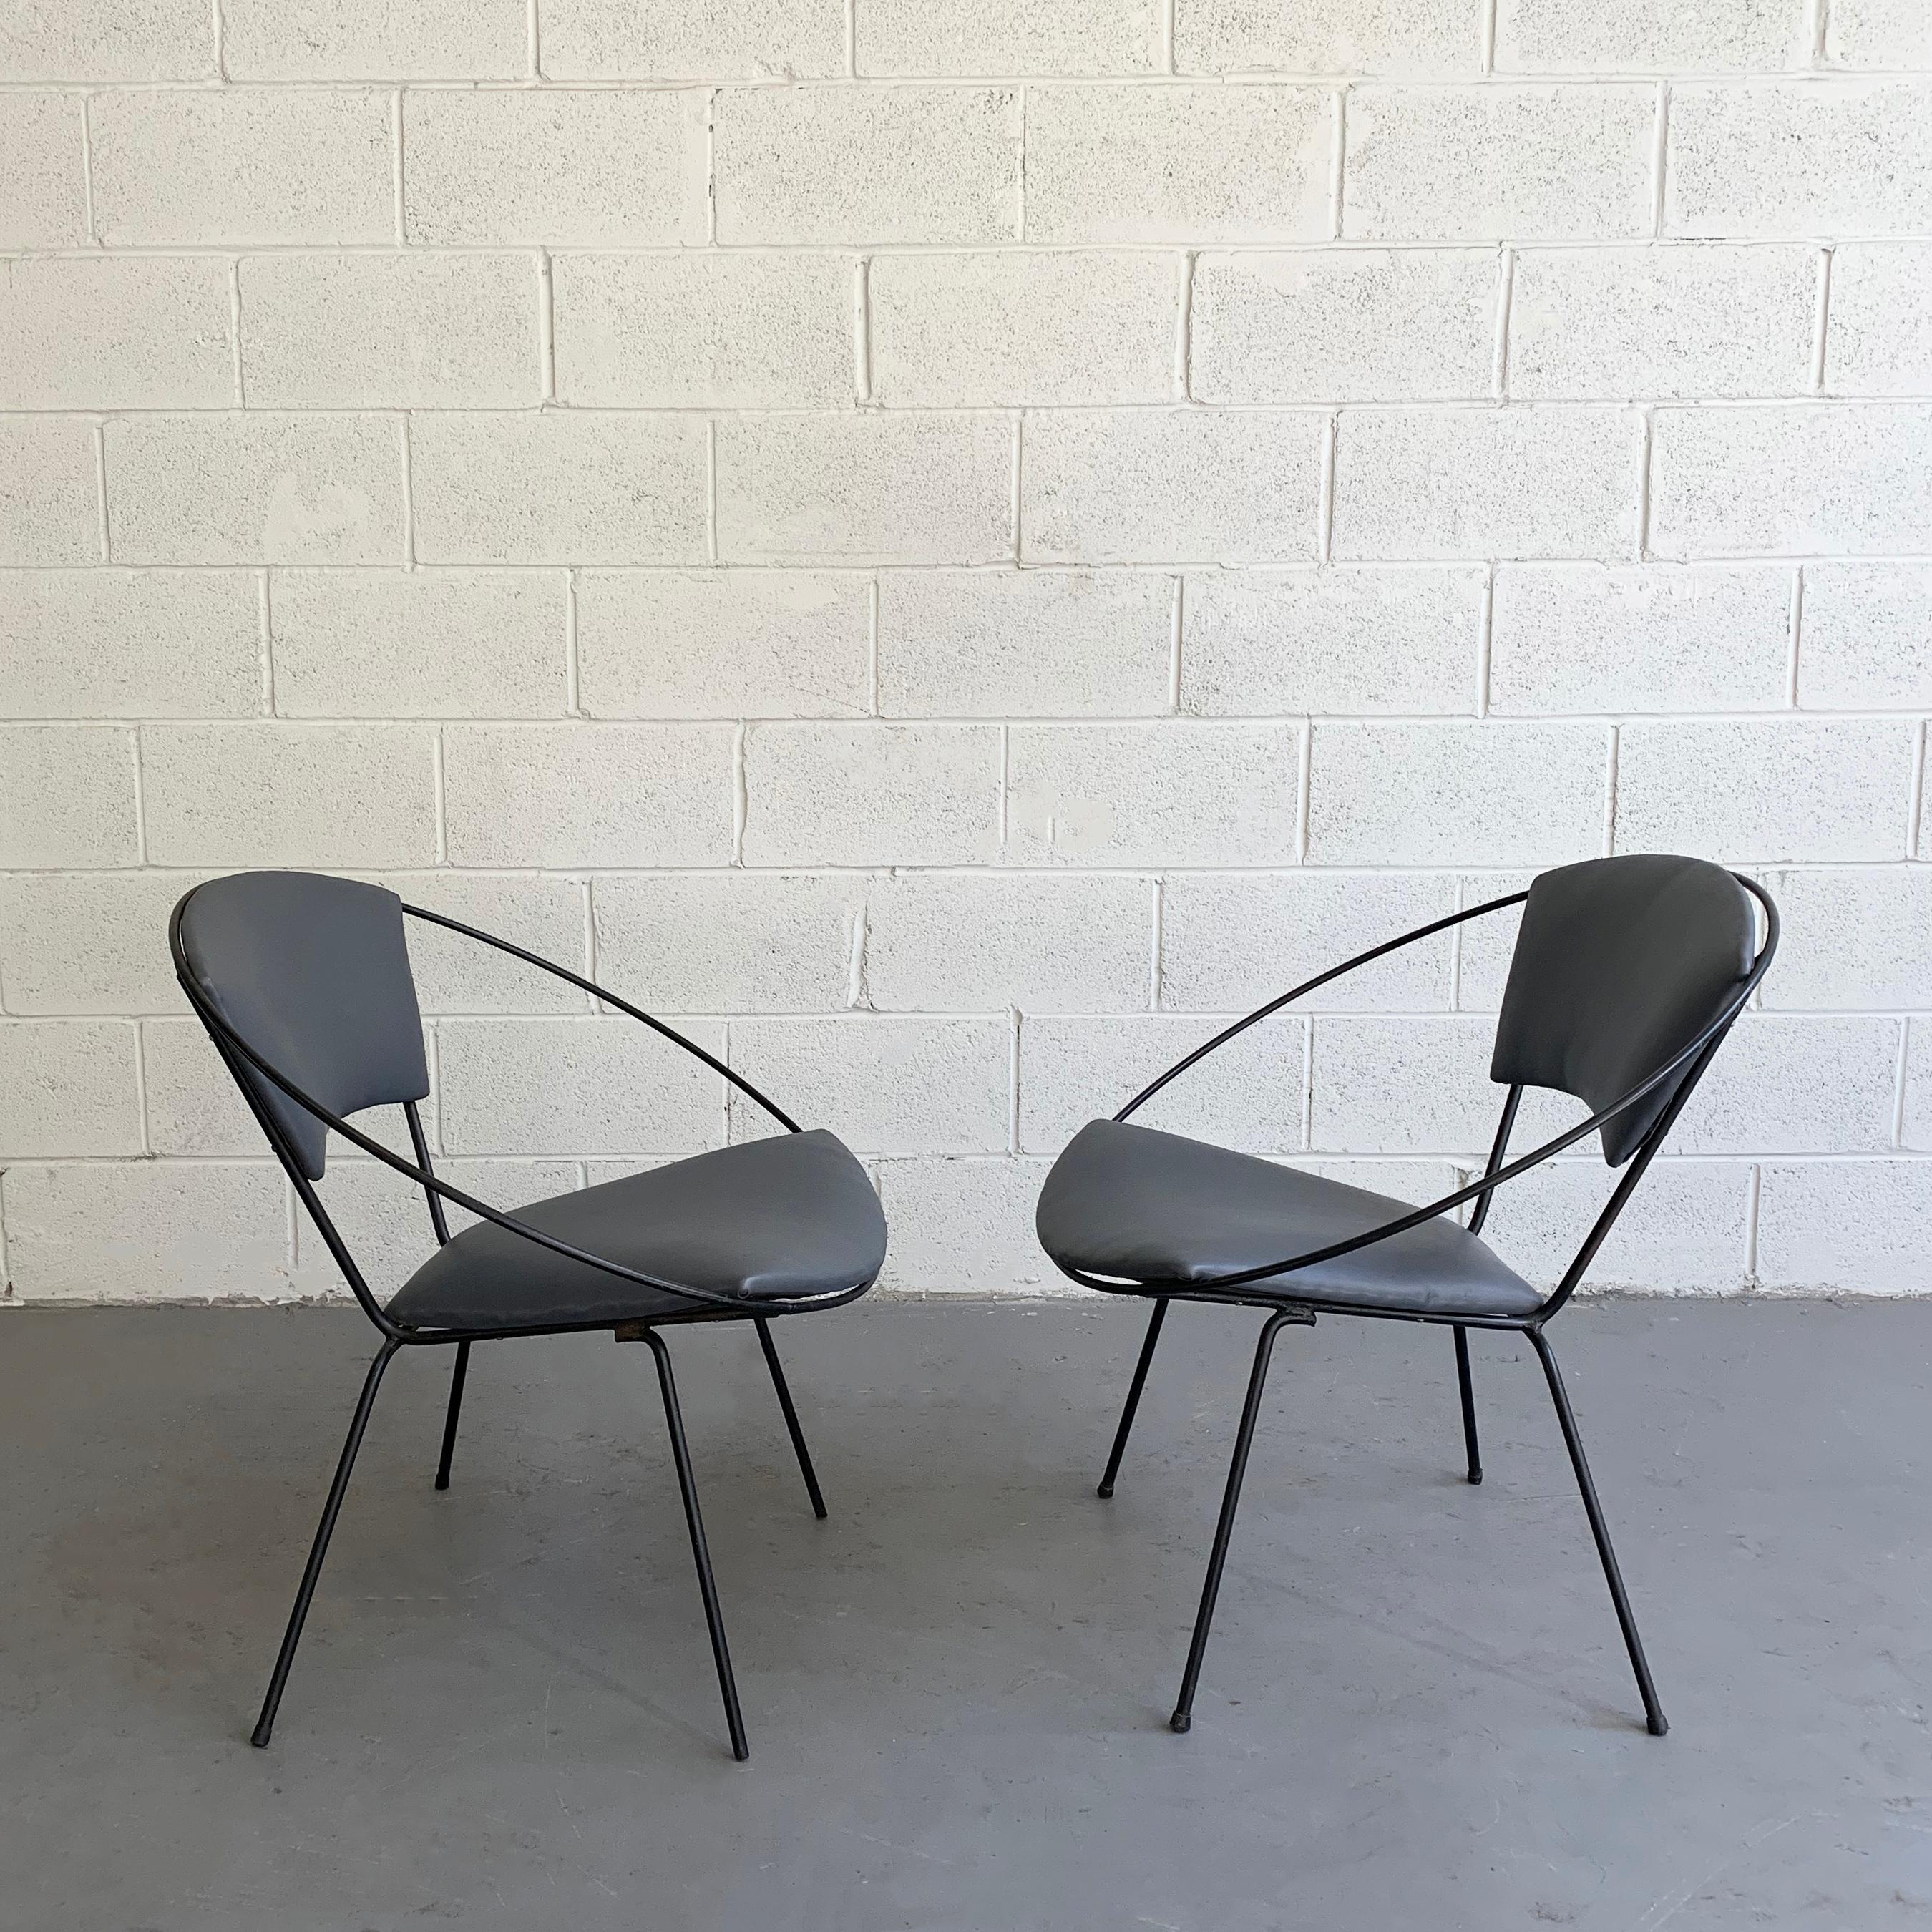 Fabric Mid-Century Modern Wrought Iron Upholstered Hoop Chairs